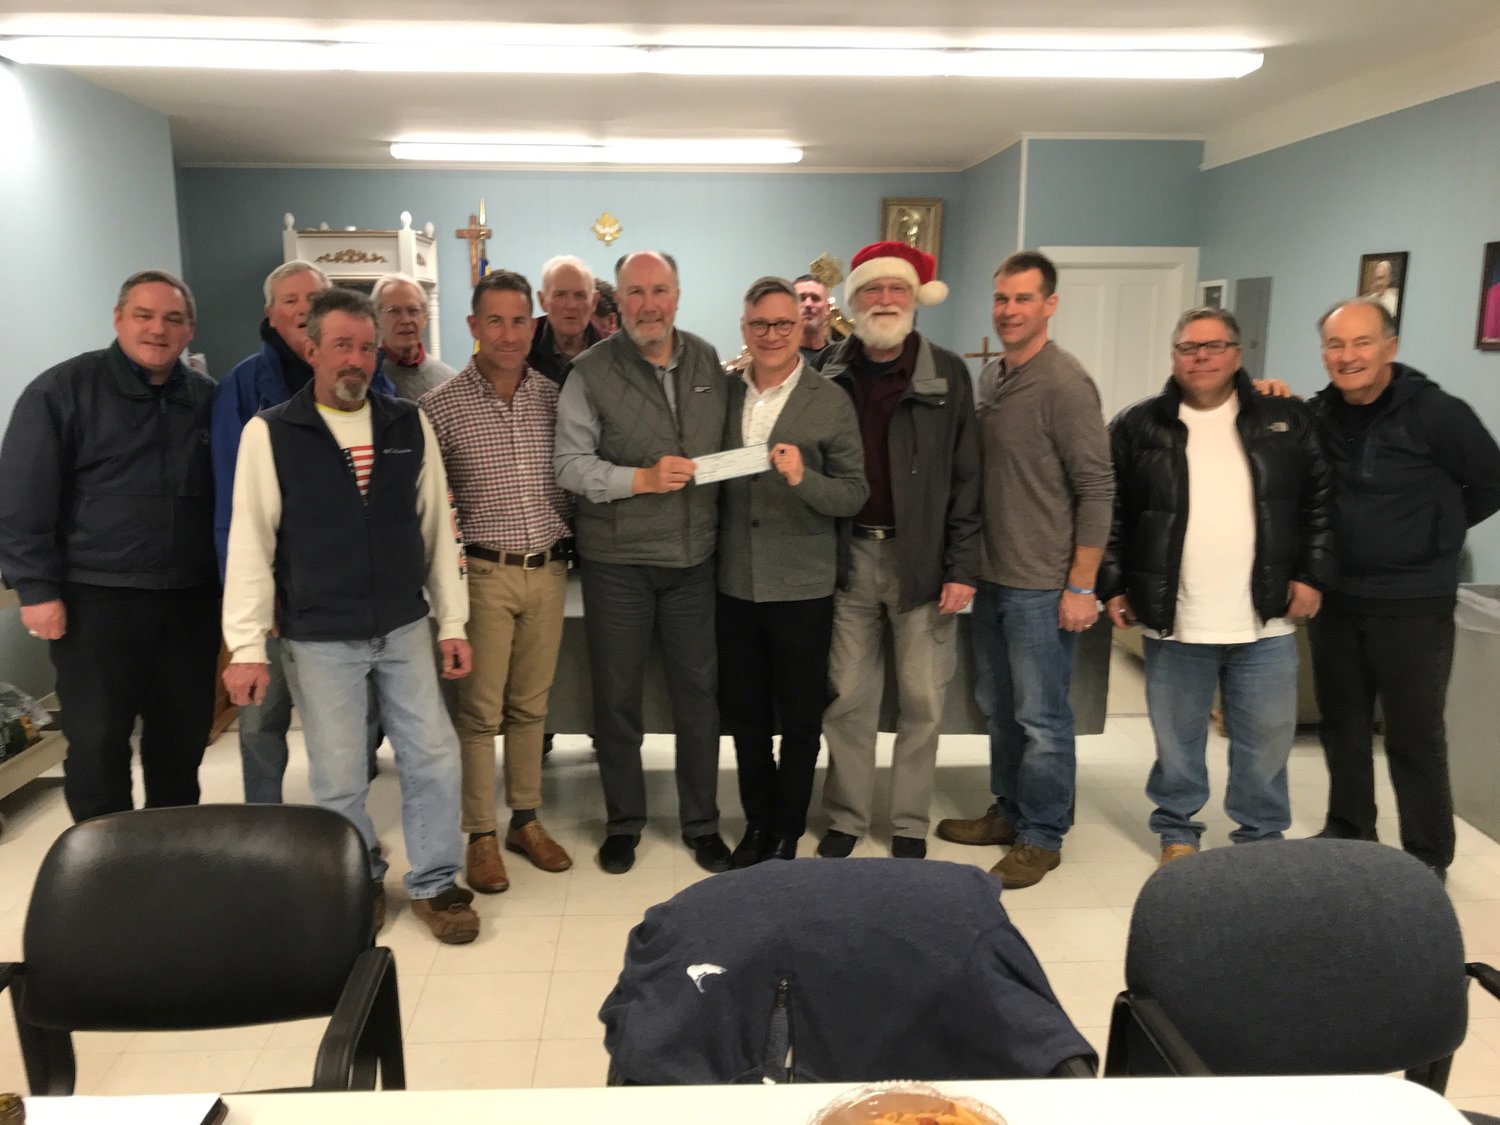 Vincent DeBaggis of the Knights of Columbus T.J. McGee Council presents a check for $17,000 to Inky Santa Toy Drive board member Kenny Hilbig.